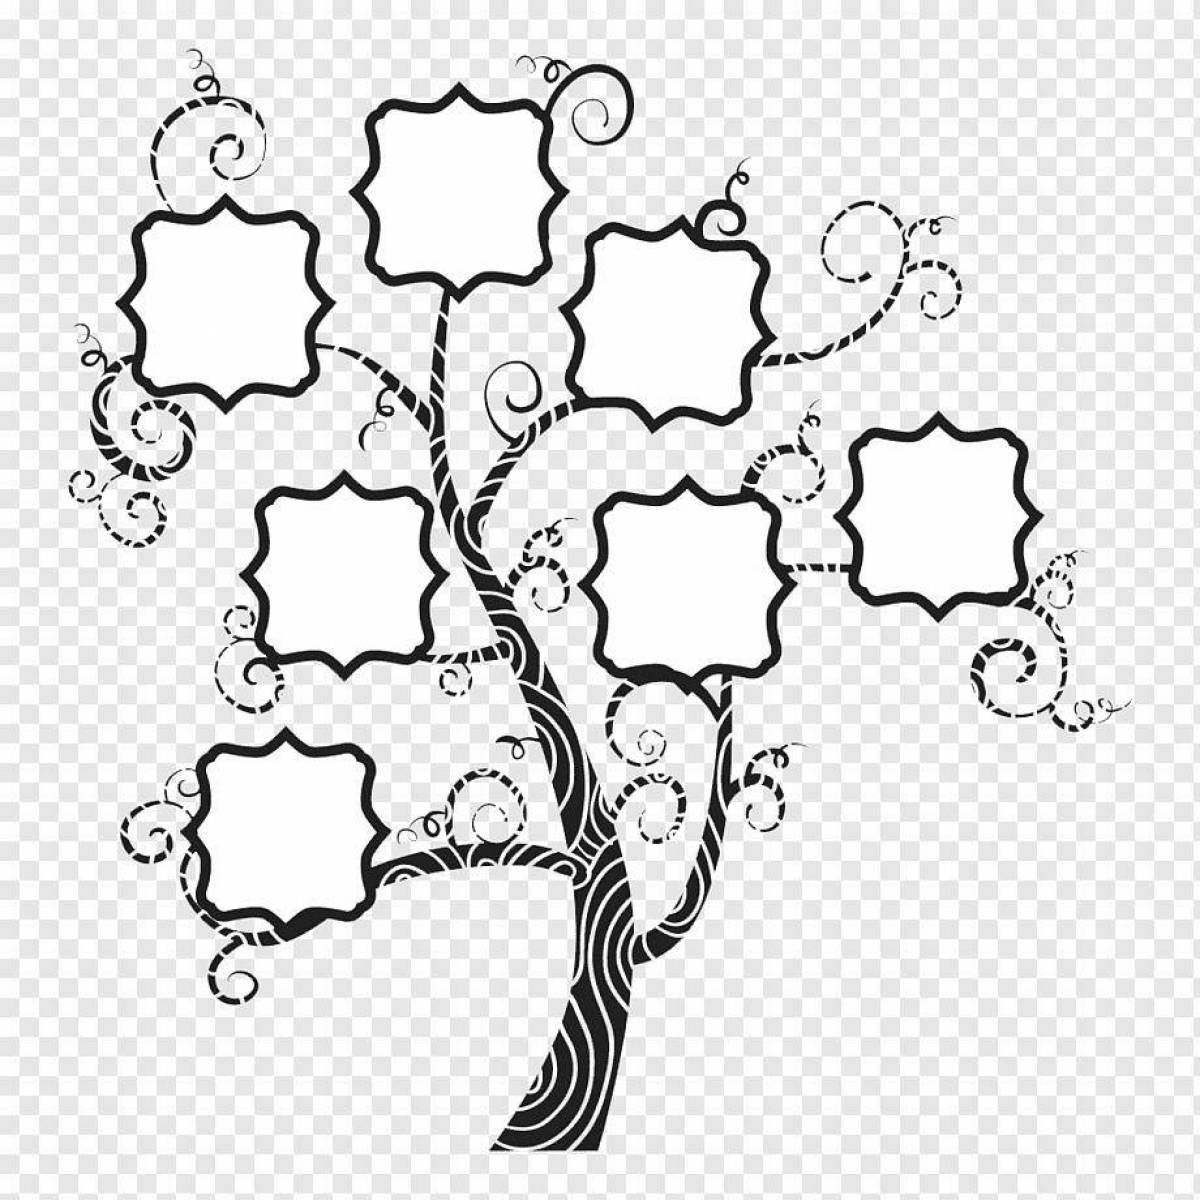 Glowing family tree coloring page